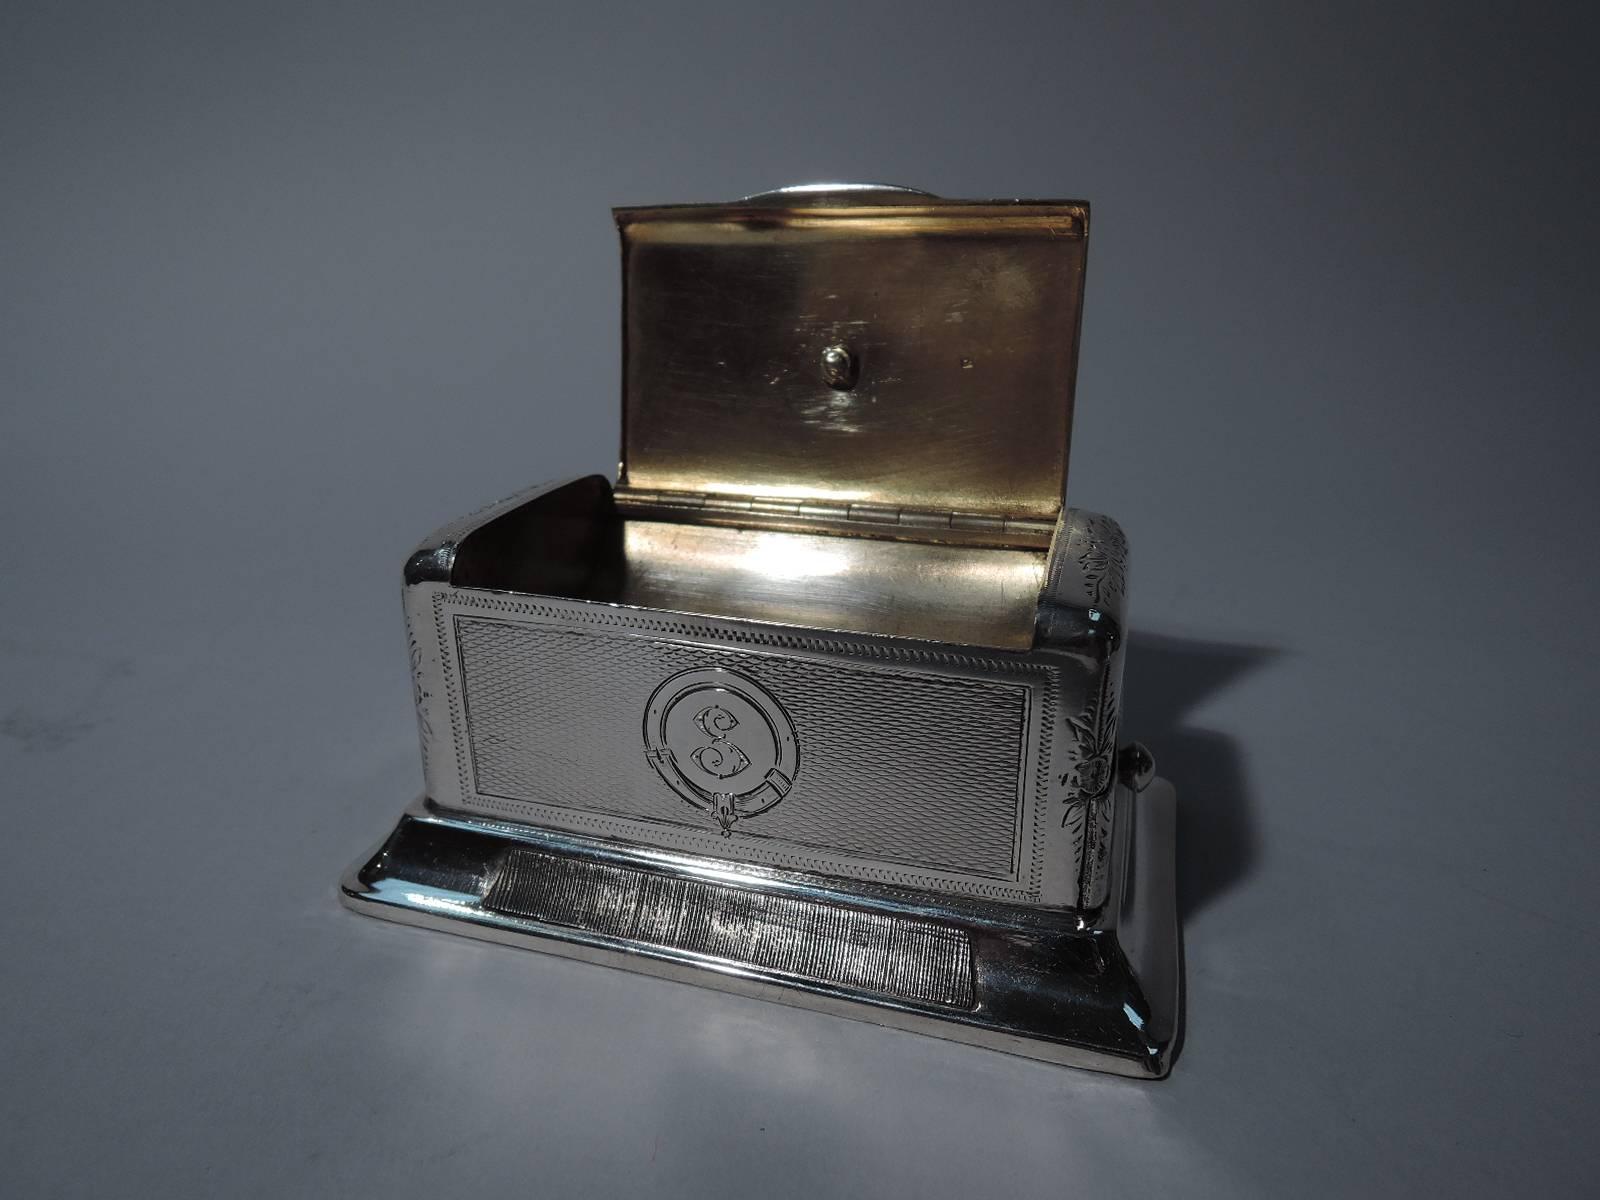 Austrian 800 silver matchbox, circa 1880. Rectangular with engine-turned panels and engraved foliage and flowers. Cover hinged and tabbed with fox finial. End drawer with ball finial. Spread foot with strike. Box and cover interior lightly gilt as